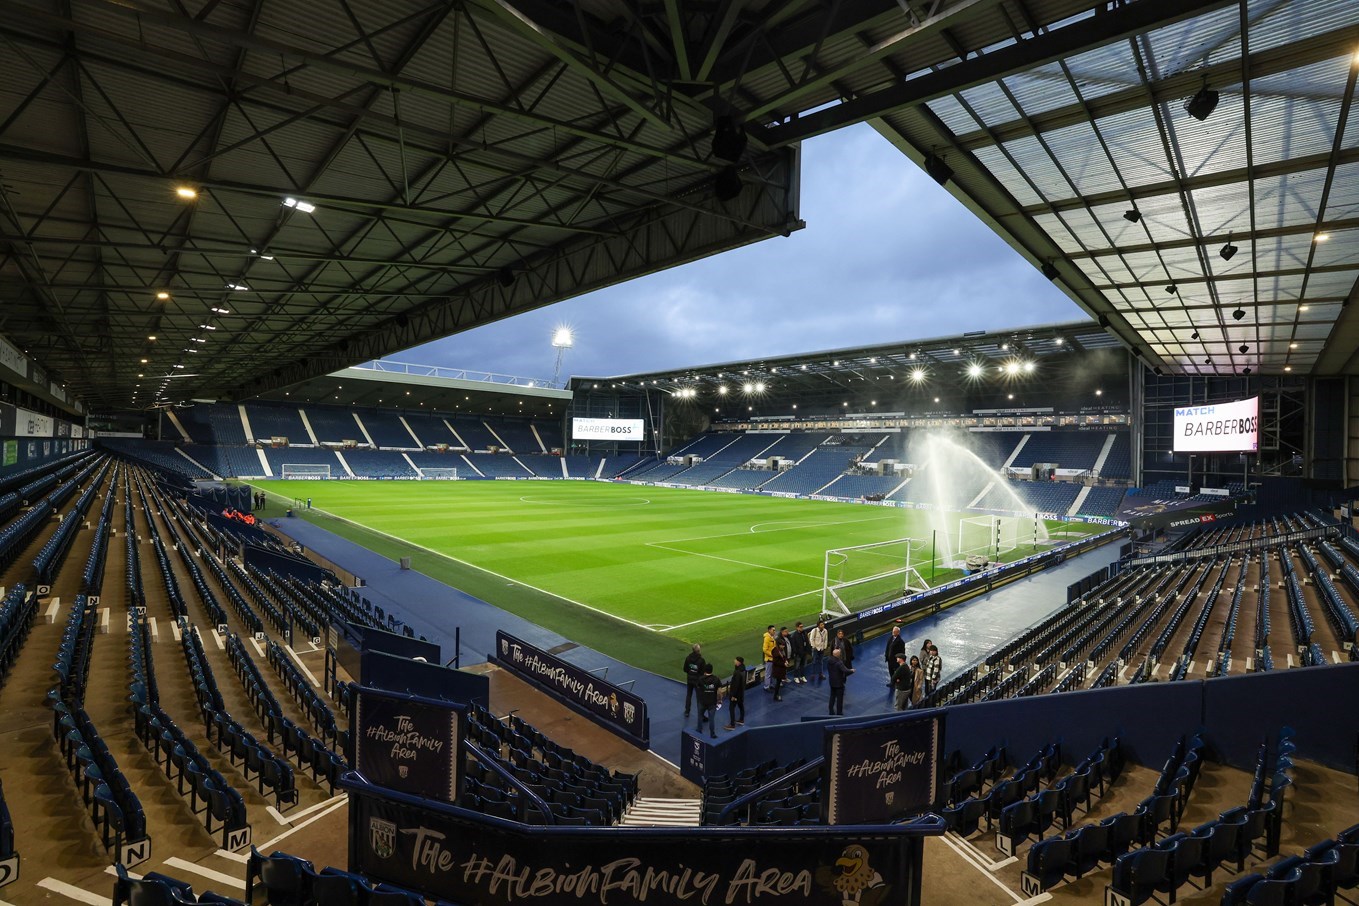 PREVIEW: Coventry City travel to the Hawthorns to take on West Bromwich  Albion - News - Coventry City